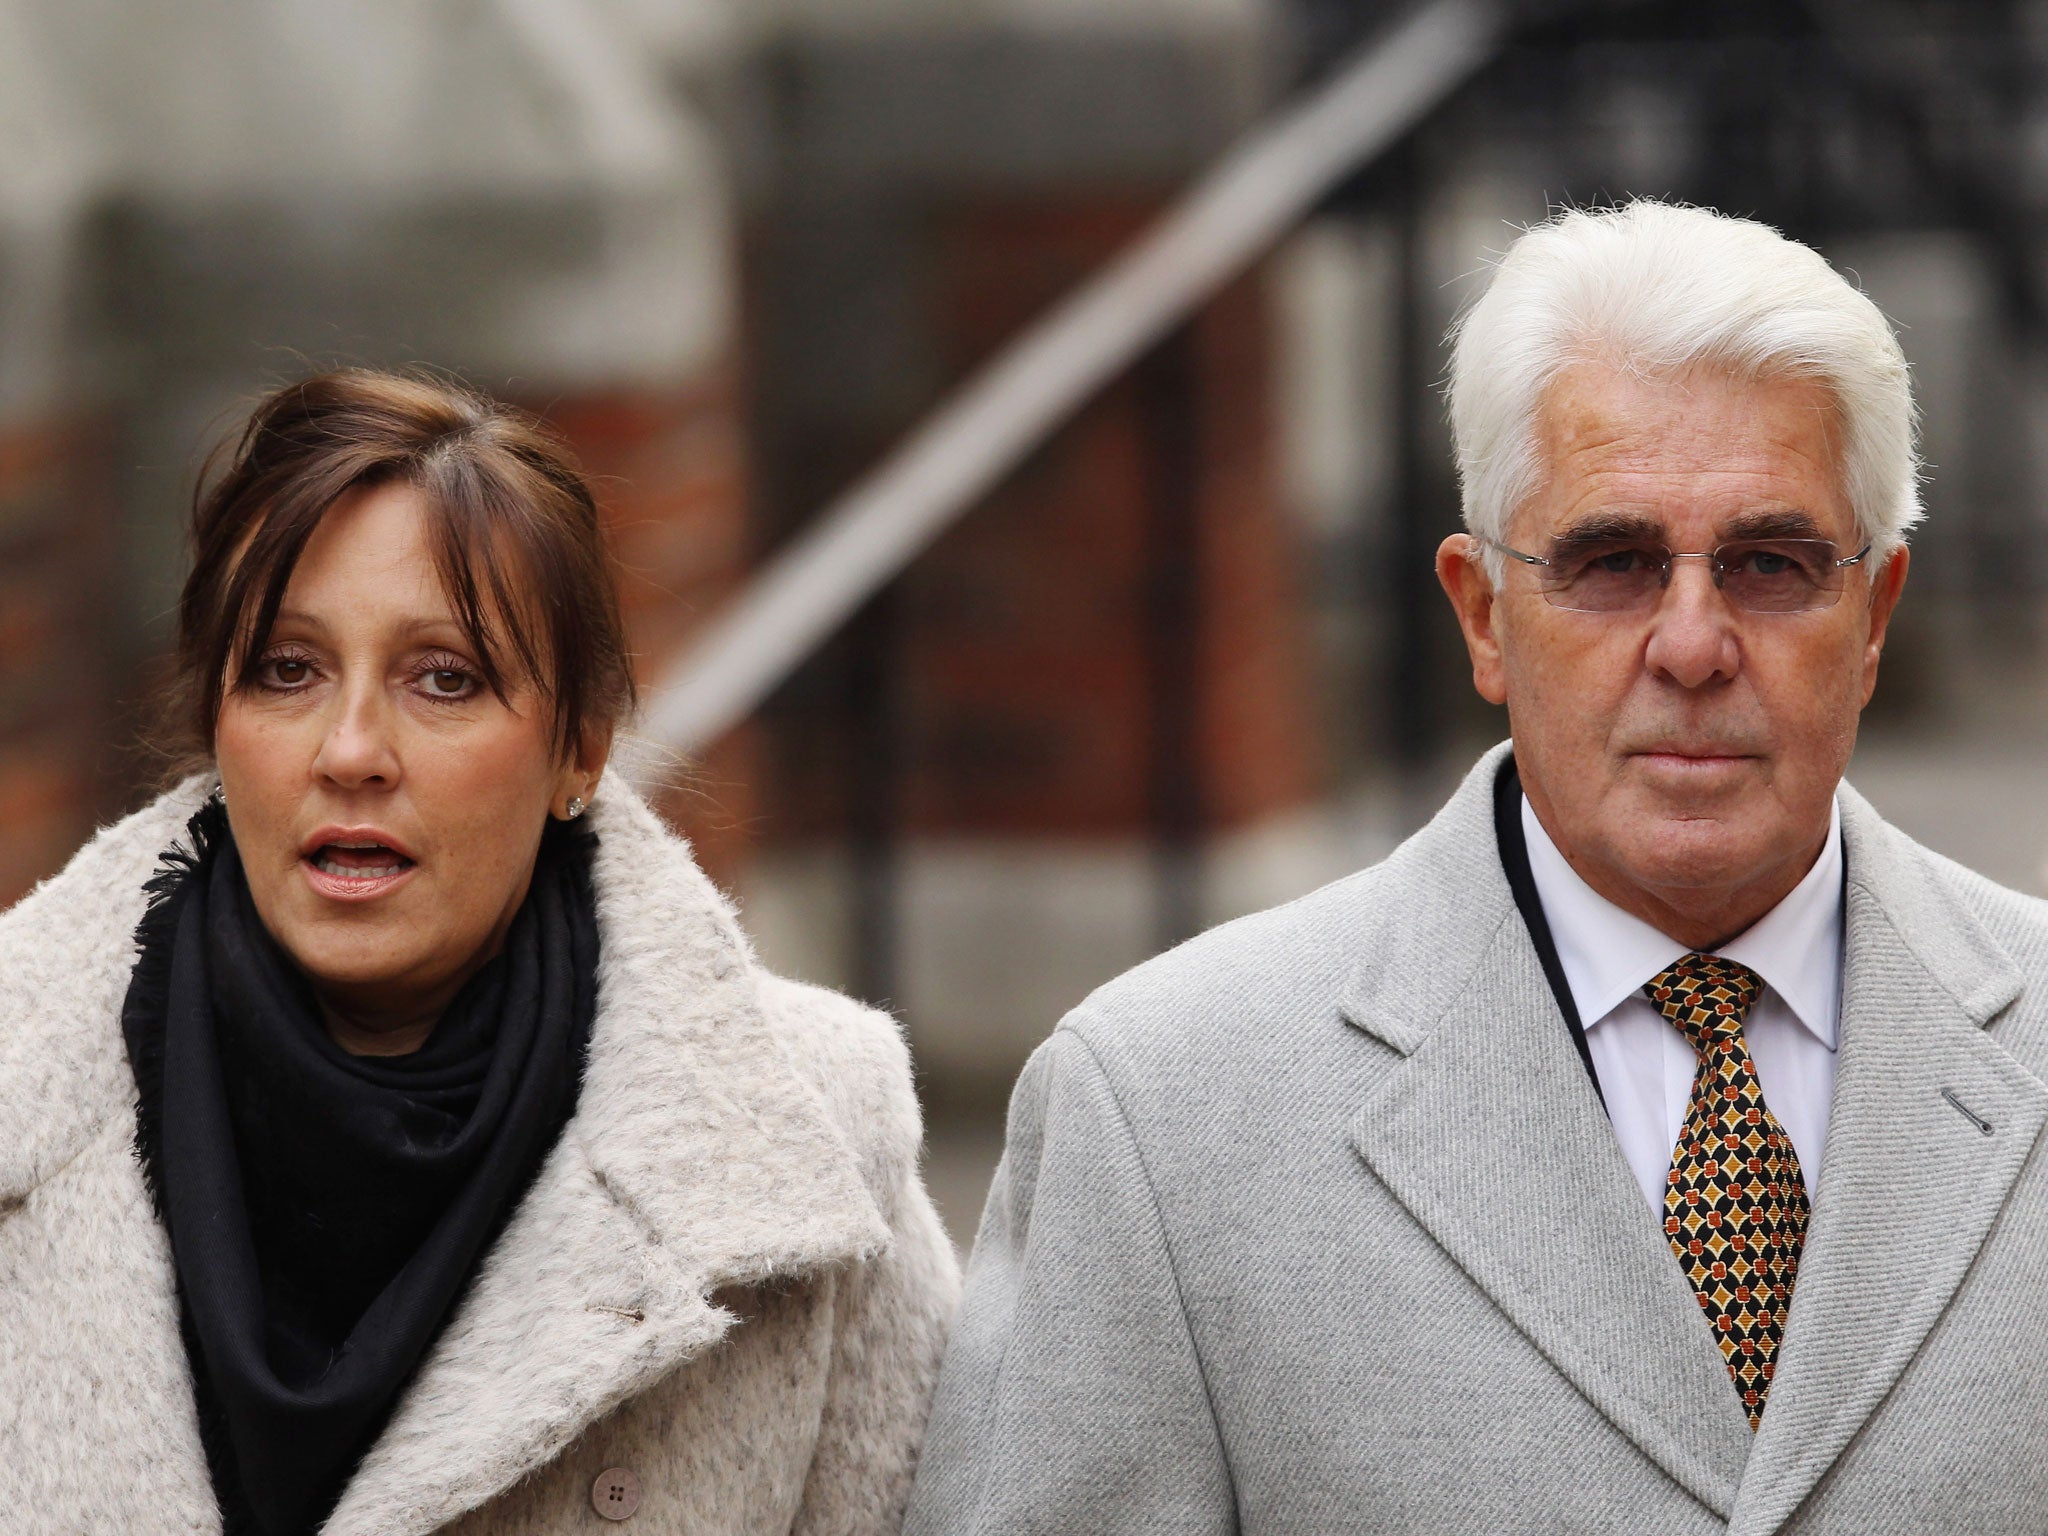 Max Clifford Wife Jo seeking divorce from disgraced publicist husband The Independent The Independent pic